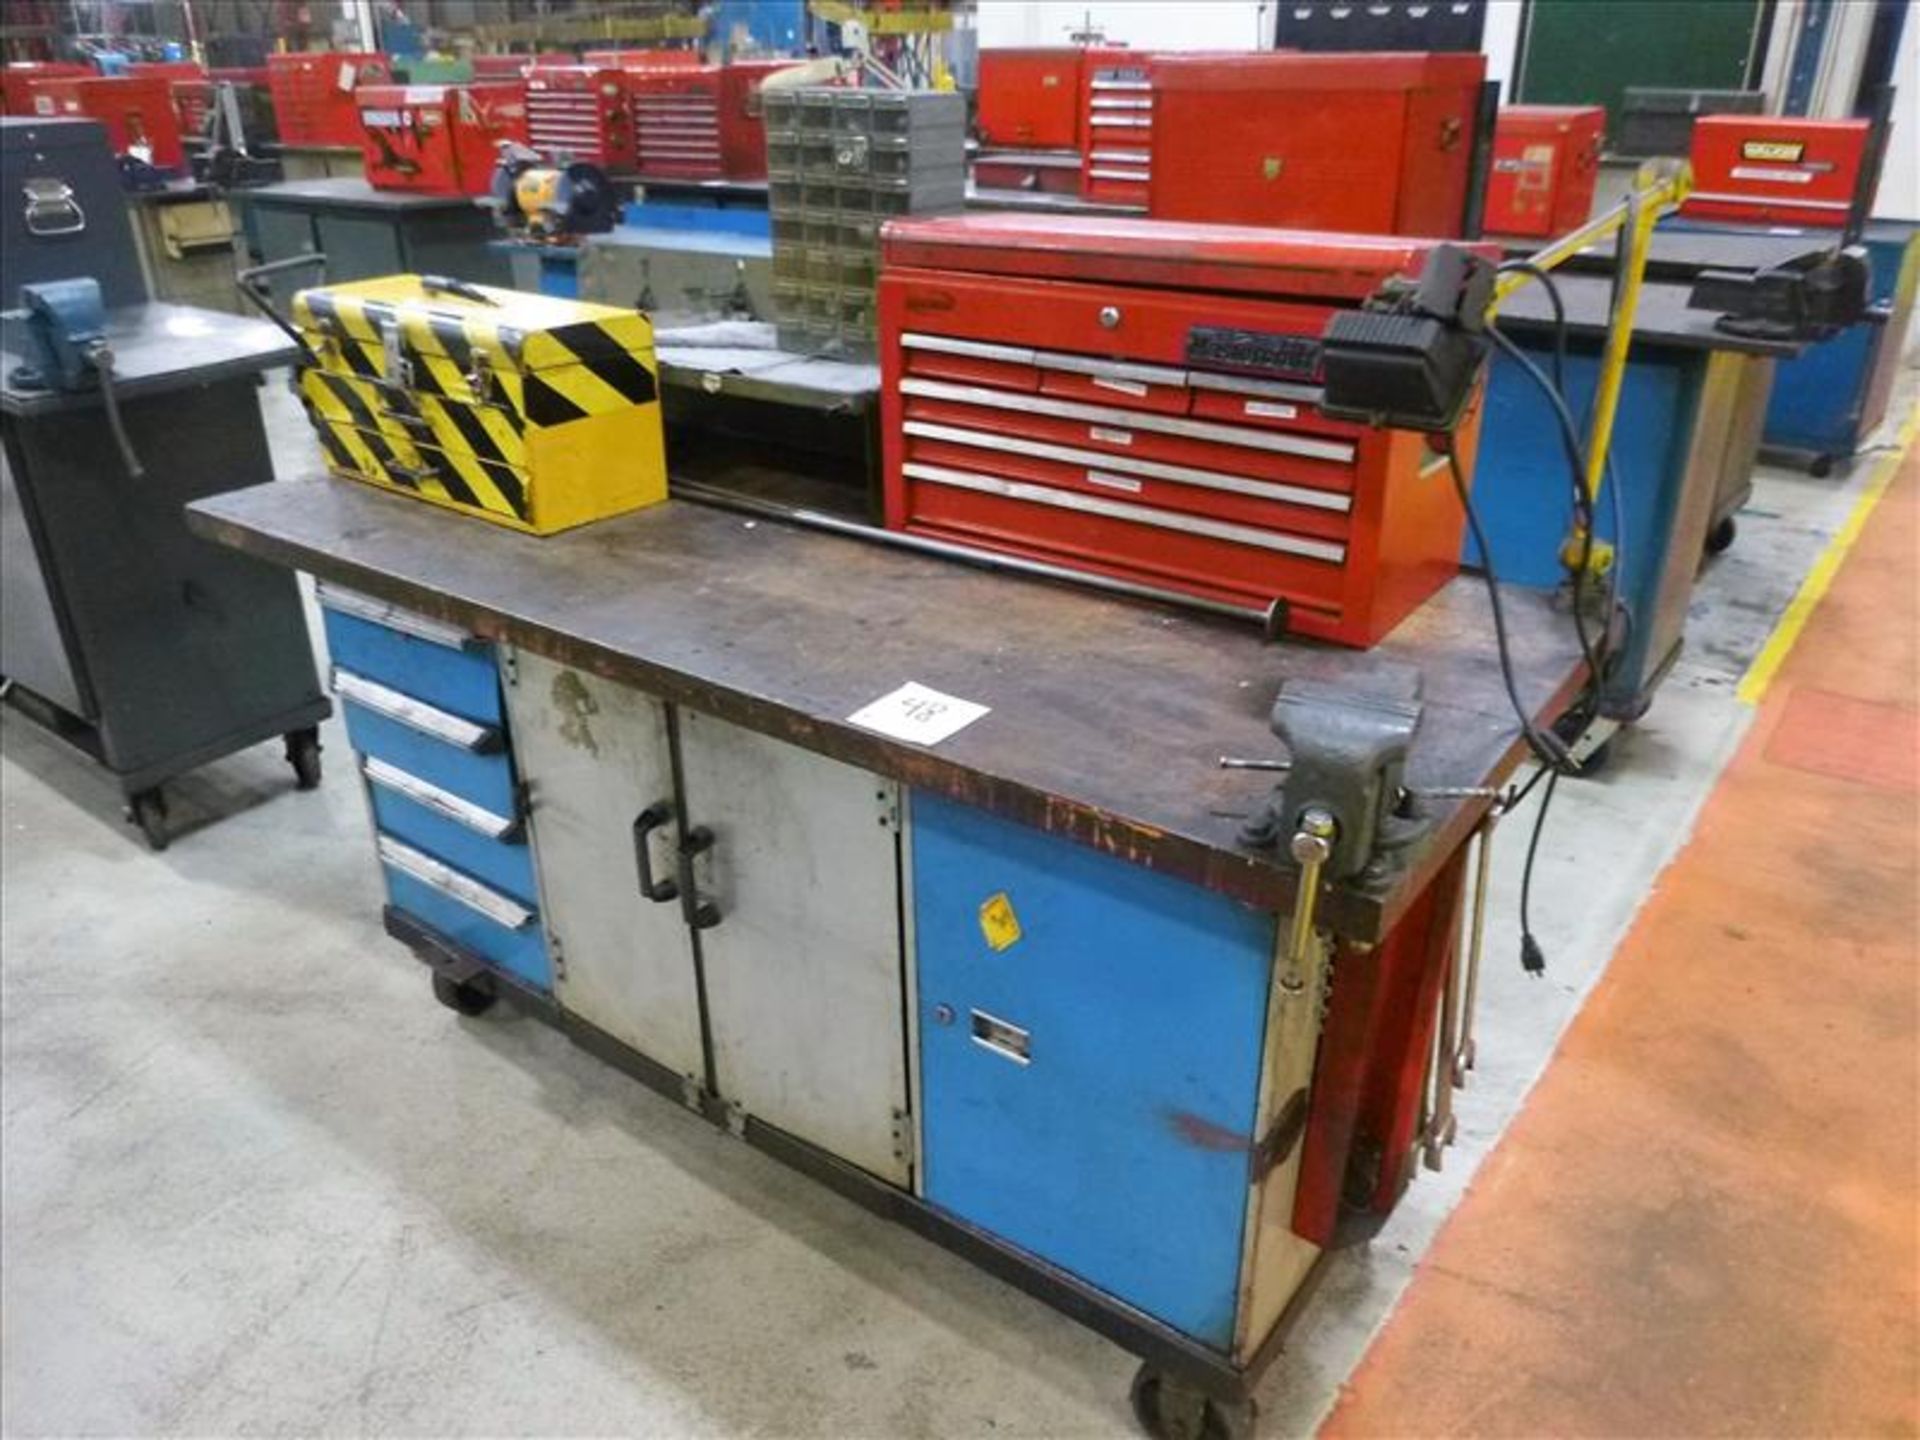 Rolling Work Bench, approx. 30" x 72" c/w 4" Bench Vice & Contents (Hand Tools, Spare Parts, - Image 2 of 4